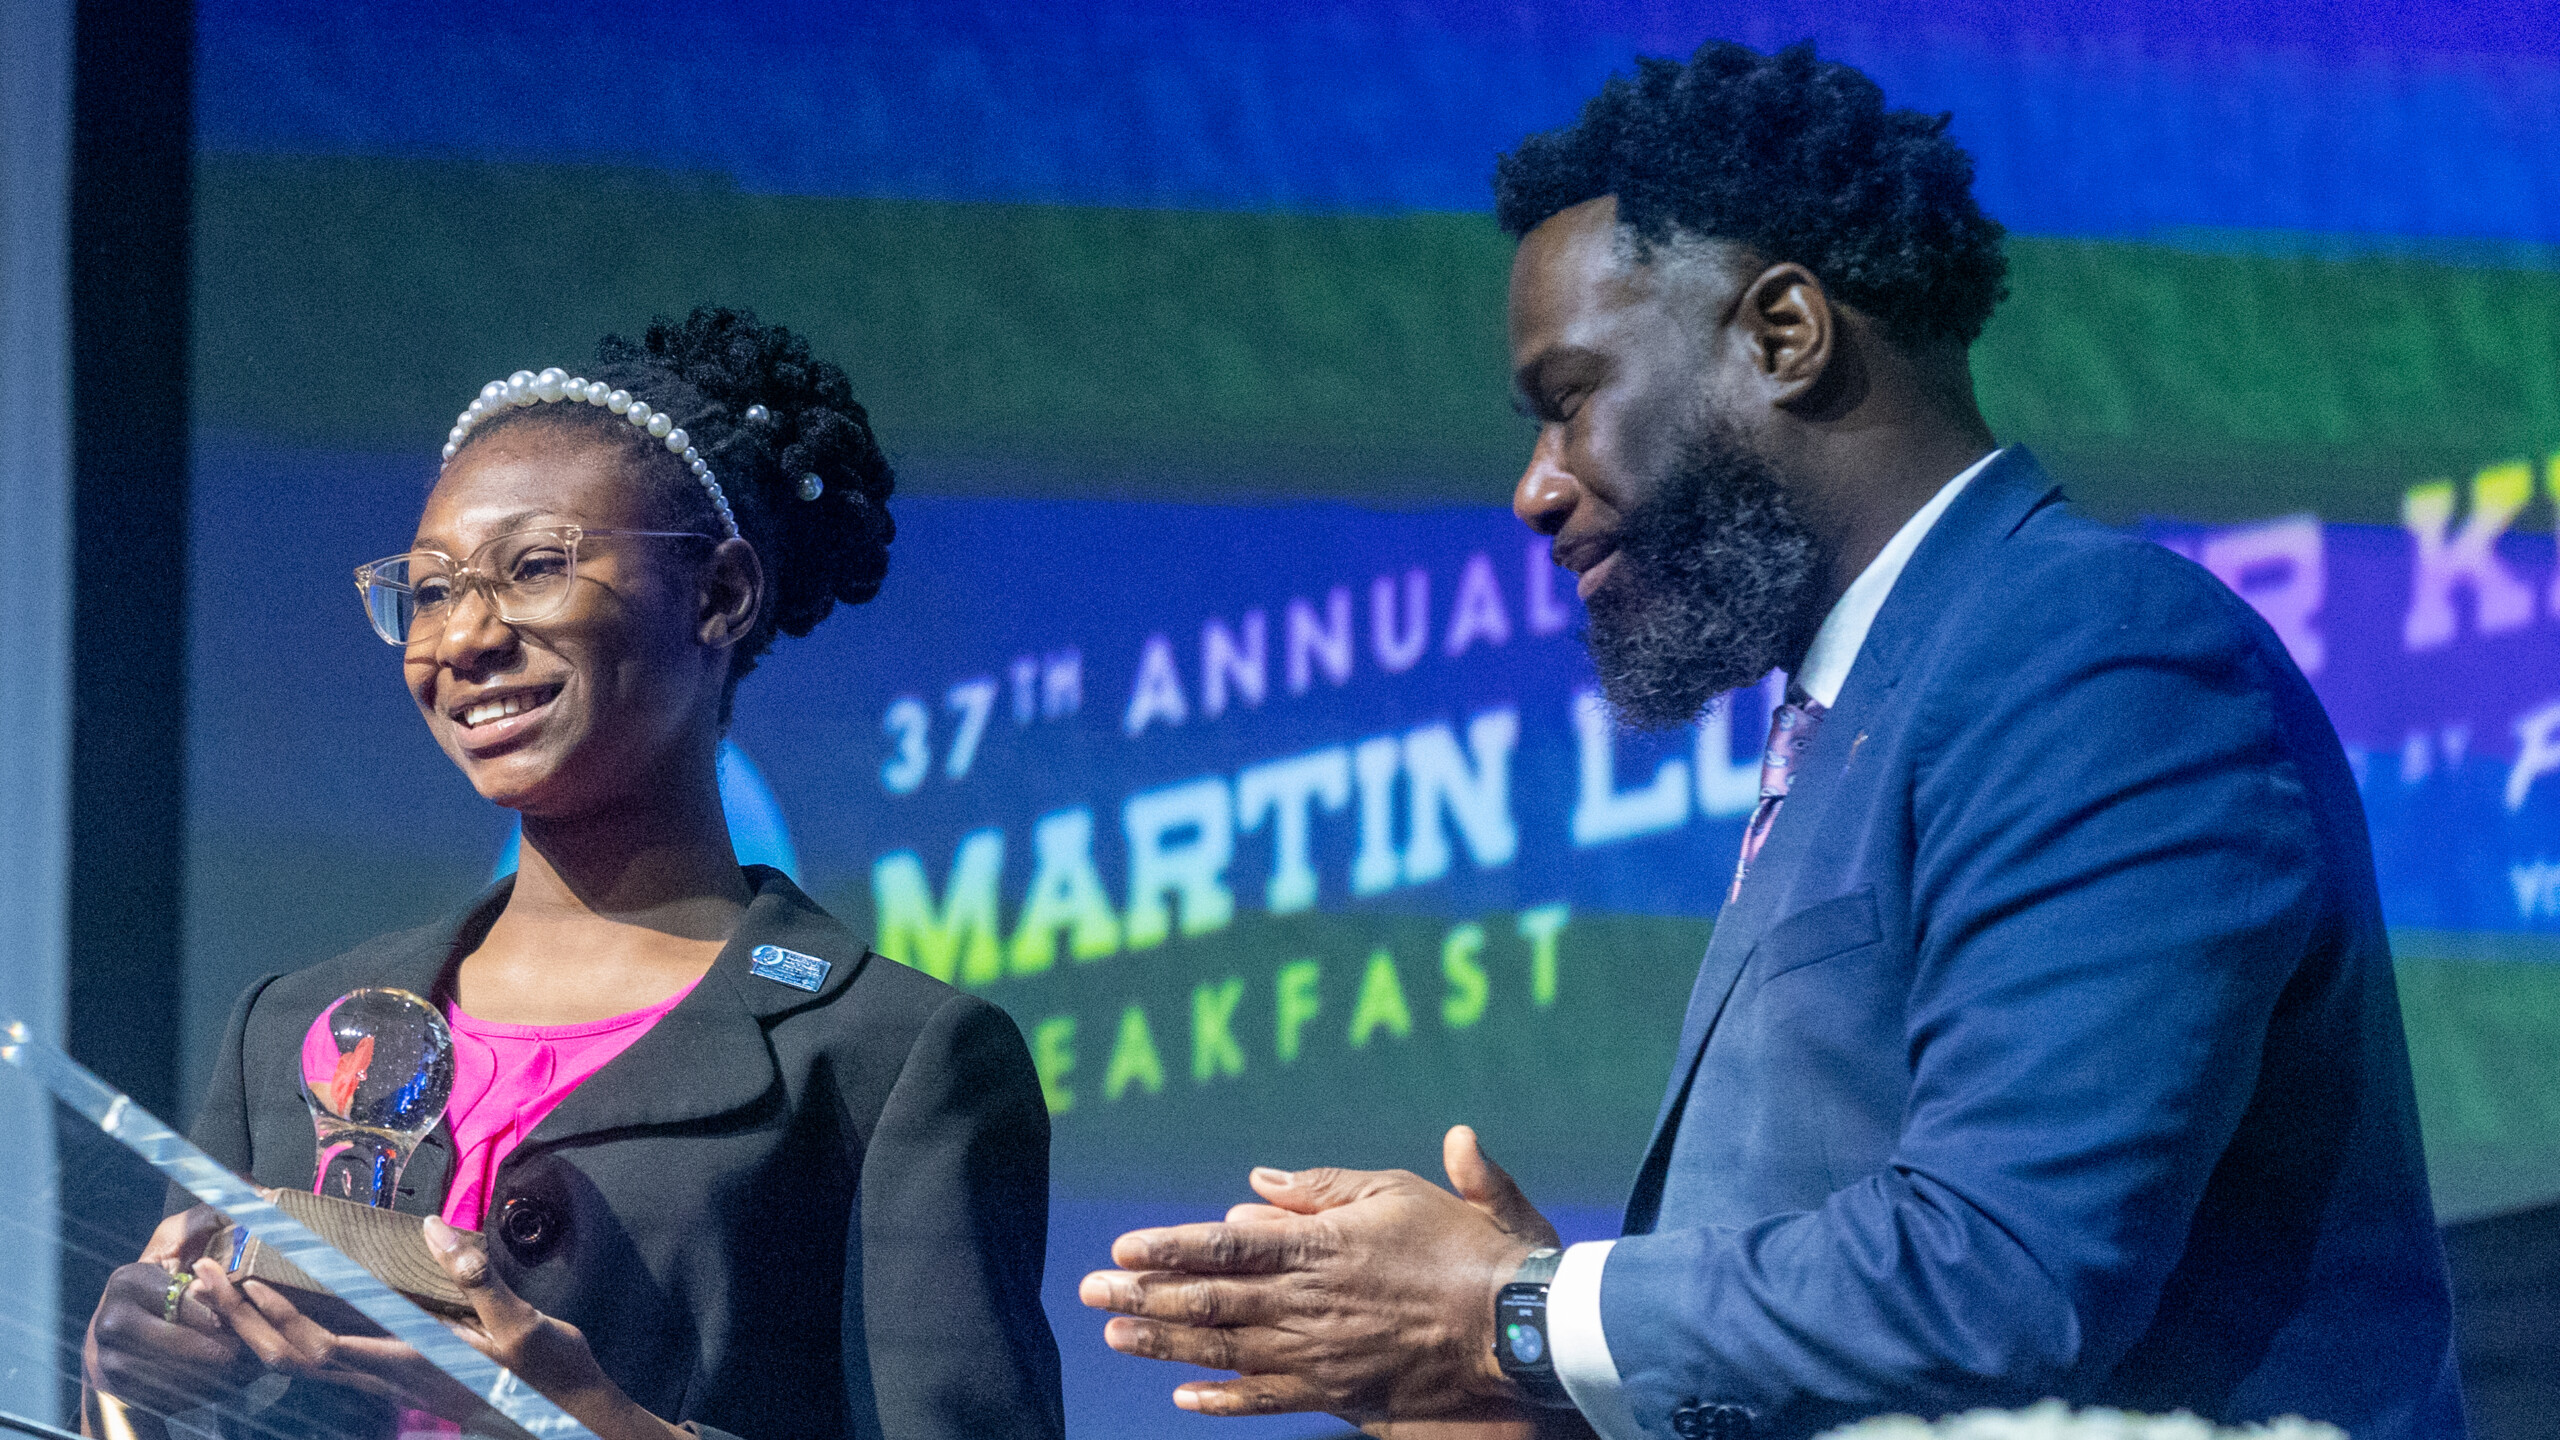 Featured image for “‘Tomorrow’s Leaders’ highlight reunited MLK breakfast”